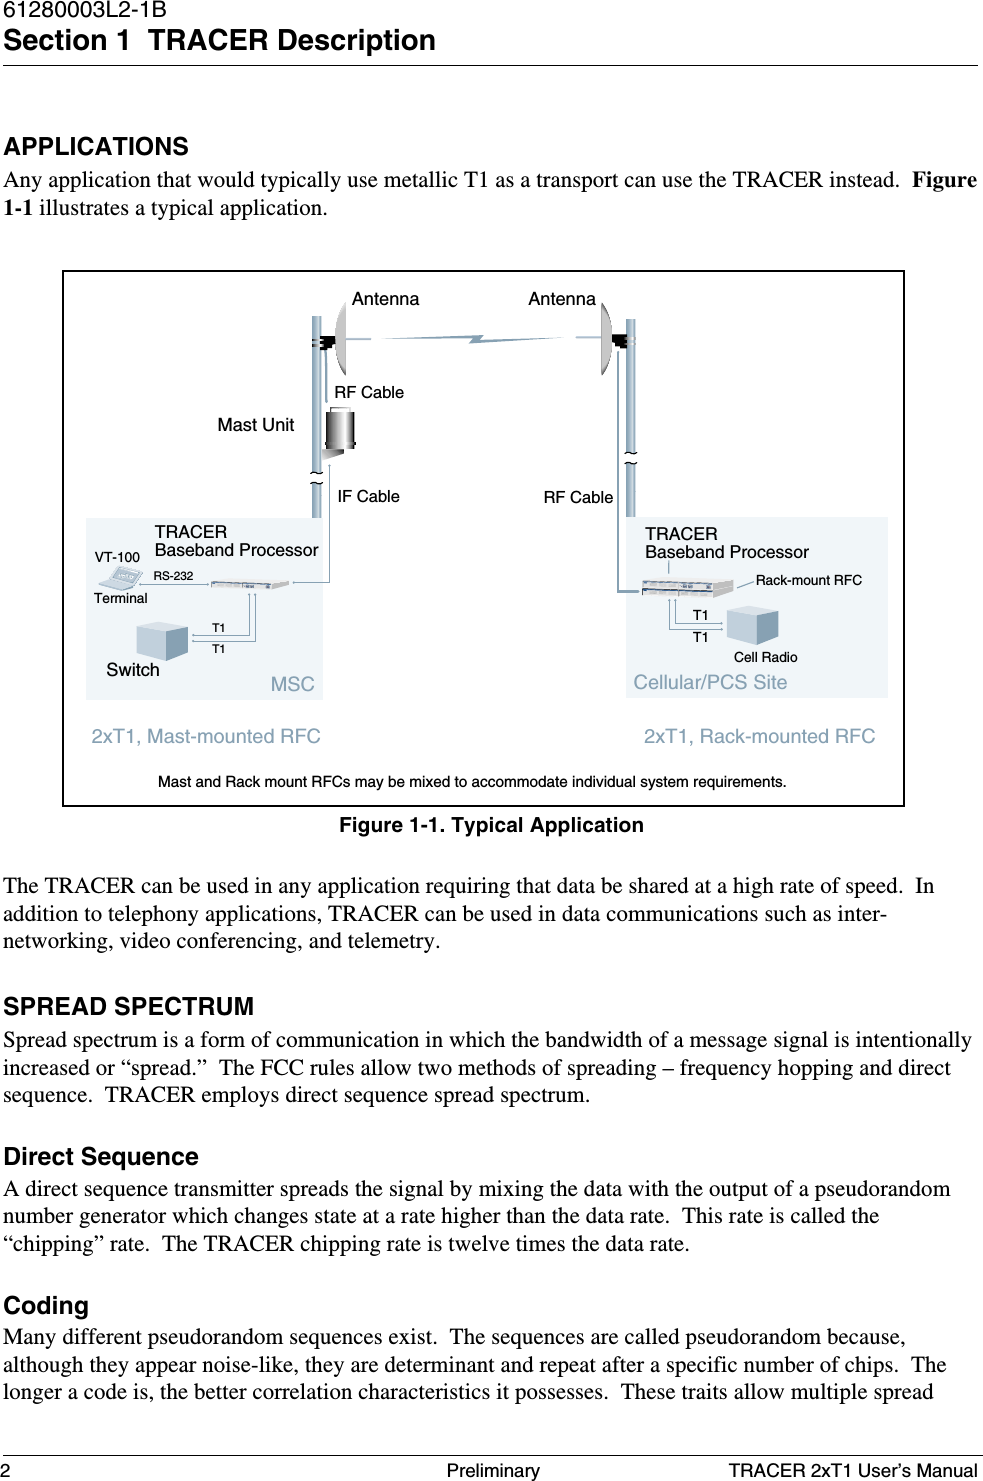 TRACER 2xT1 User’s Manual61280003L2-1BSection 1  TRACER Description2 PreliminaryAPPLICATIONSAny application that would typically use metallic T1 as a transport can use the TRACER instead.  Figure1-1 illustrates a typical application.The TRACER can be used in any application requiring that data be shared at a high rate of speed.  Inaddition to telephony applications, TRACER can be used in data communications such as inter-networking, video conferencing, and telemetry.SPREAD SPECTRUMSpread spectrum is a form of communication in which the bandwidth of a message signal is intentionallyincreased or “spread.”  The FCC rules allow two methods of spreading – frequency hopping and directsequence.  TRACER employs direct sequence spread spectrum.Direct SequenceA direct sequence transmitter spreads the signal by mixing the data with the output of a pseudorandomnumber generator which changes state at a rate higher than the data rate.  This rate is called the“chipping” rate.  The TRACER chipping rate is twelve times the data rate.CodingMany different pseudorandom sequences exist.  The sequences are called pseudorandom because,although they appear noise-like, they are determinant and repeat after a specific number of chips.  Thelonger a code is, the better correlation characteristics it possesses.  These traits allow multiple spreadFigure 1-1. Typical ApplicationTerminalVT-100Switch Cell RadioRS-232Cellular/PCS SiteAntenna AntennaIF CableRF CableMast UnitMast and Rack mount RFCs may be mixed to accommodate individual system requirements.TRACERBaseband Processor2xT1, Rack-mounted RFCTRACERBaseband ProcessorT1T1T1T1MSCT1BDATA AISBDATA AIST1POWTRANSCEITRACER2xT1, Mast-mounted RFCTRACERT1BPDATA AISBDATA AIST1POWTRANSCEITRACERRack-mount RFCRF Cable